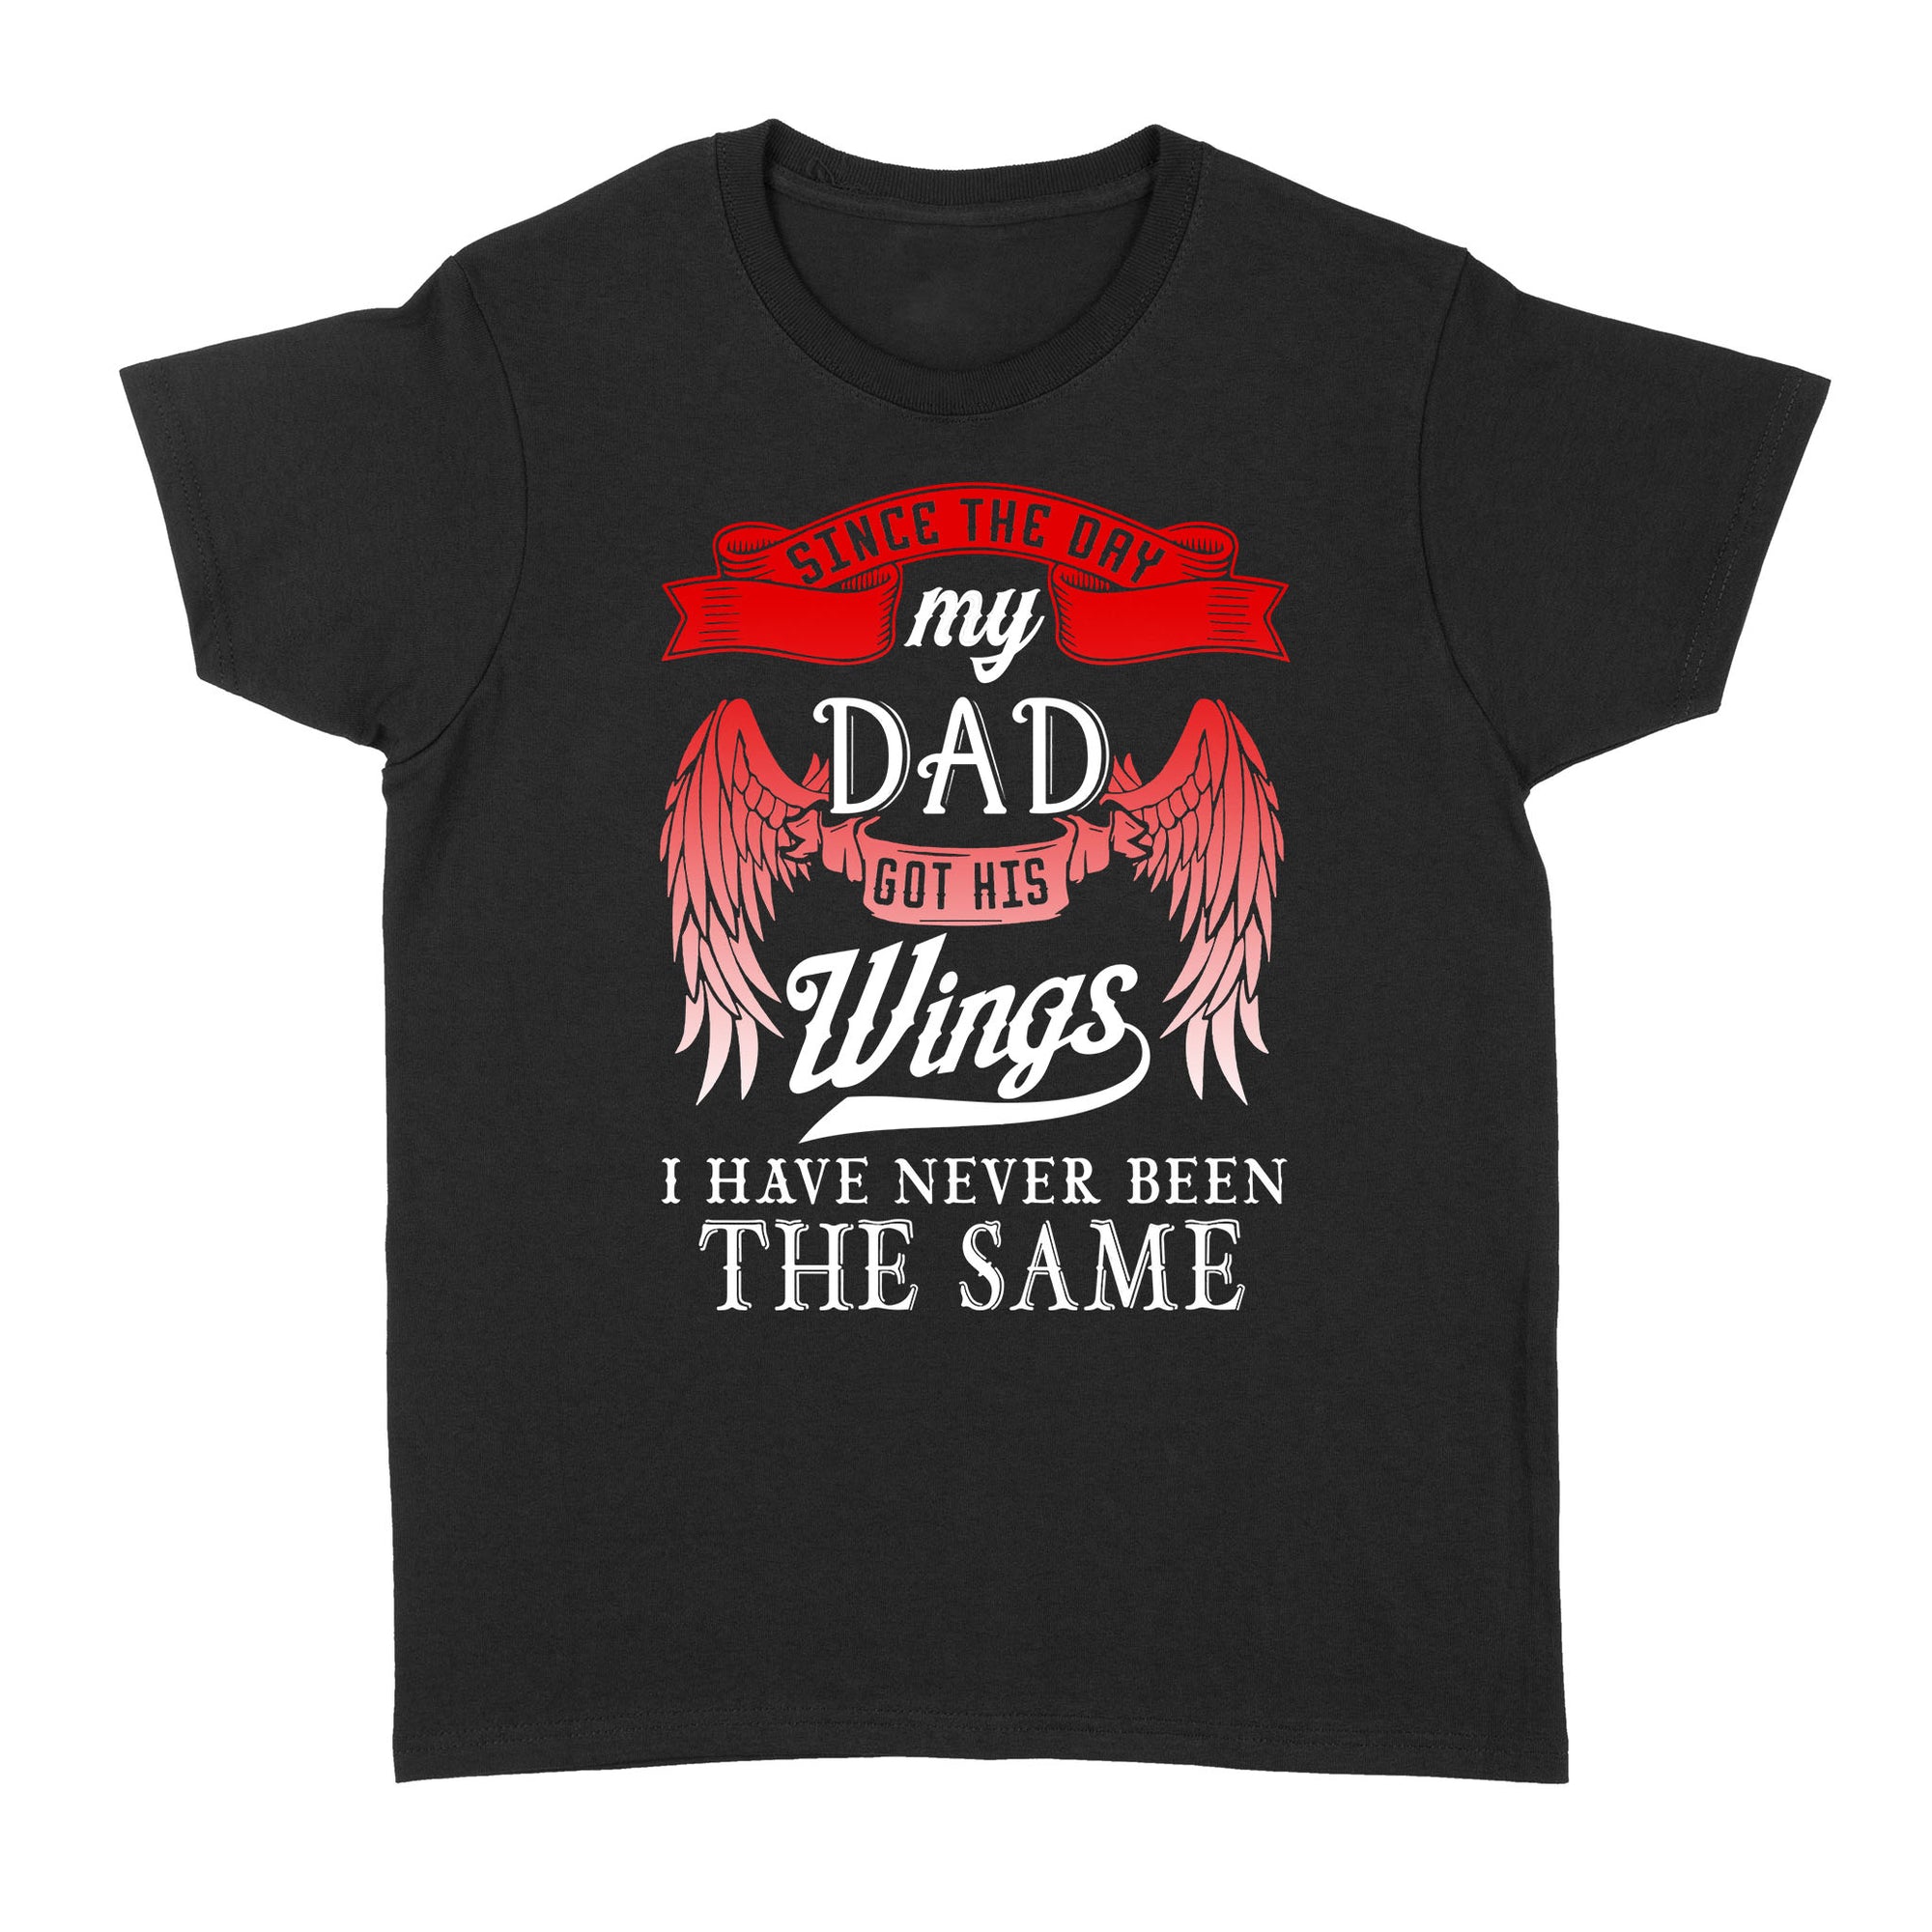 Gift Ideas for Daughter Since The Day My Dad Got HIs Wings I Have Never Been The Same (2) - Standard Women's T-shirt